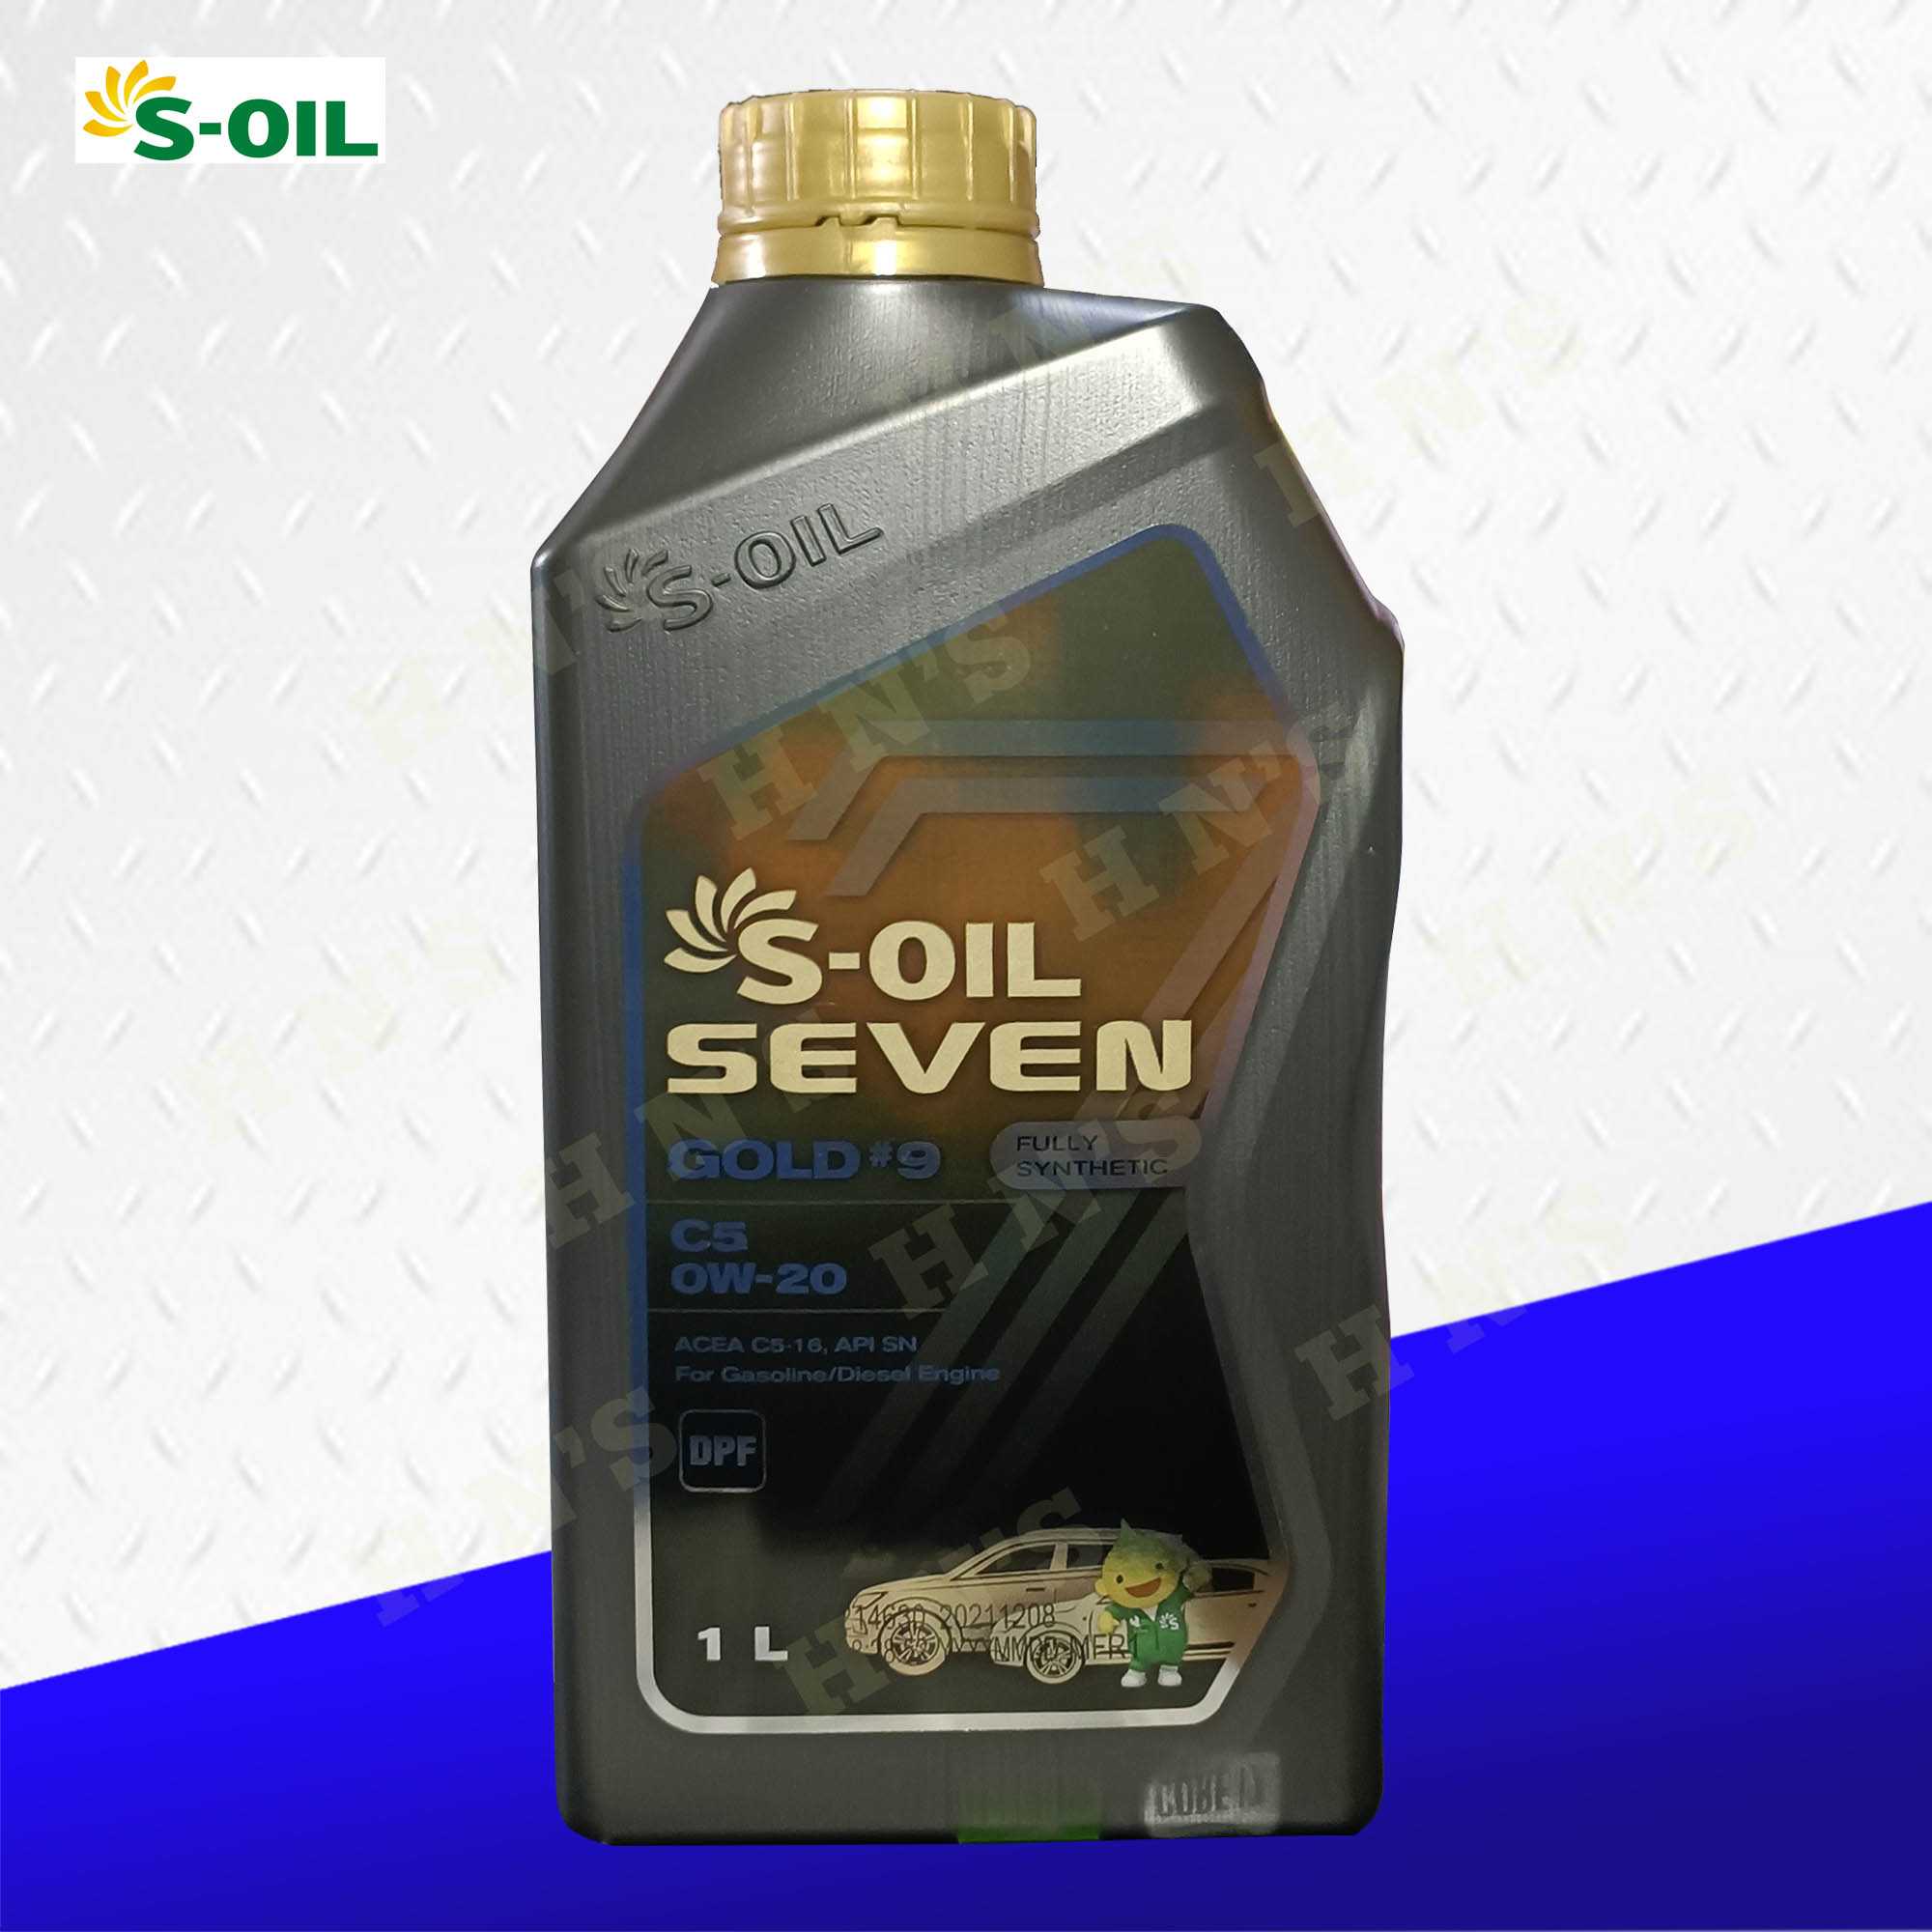 S-OIL Seven Gold #9 0W-20 Fully Synthetic Engine Oil API SN ACEA C5-16 .